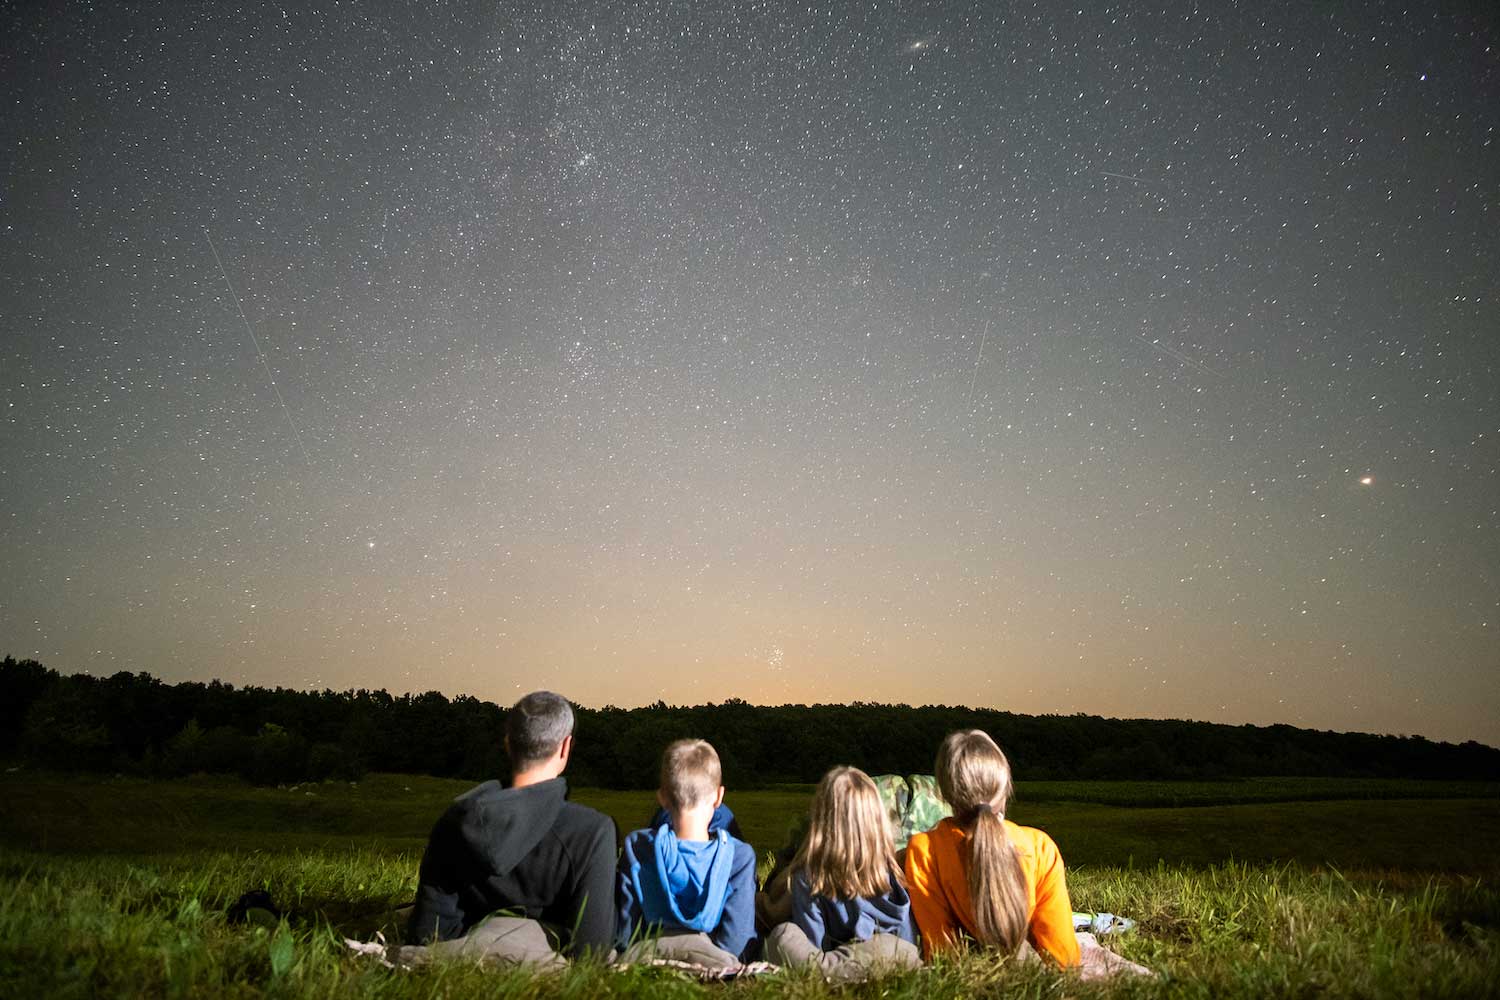 A group of two adults and two kids looking at the night sky while laying on a blanket in the grass.